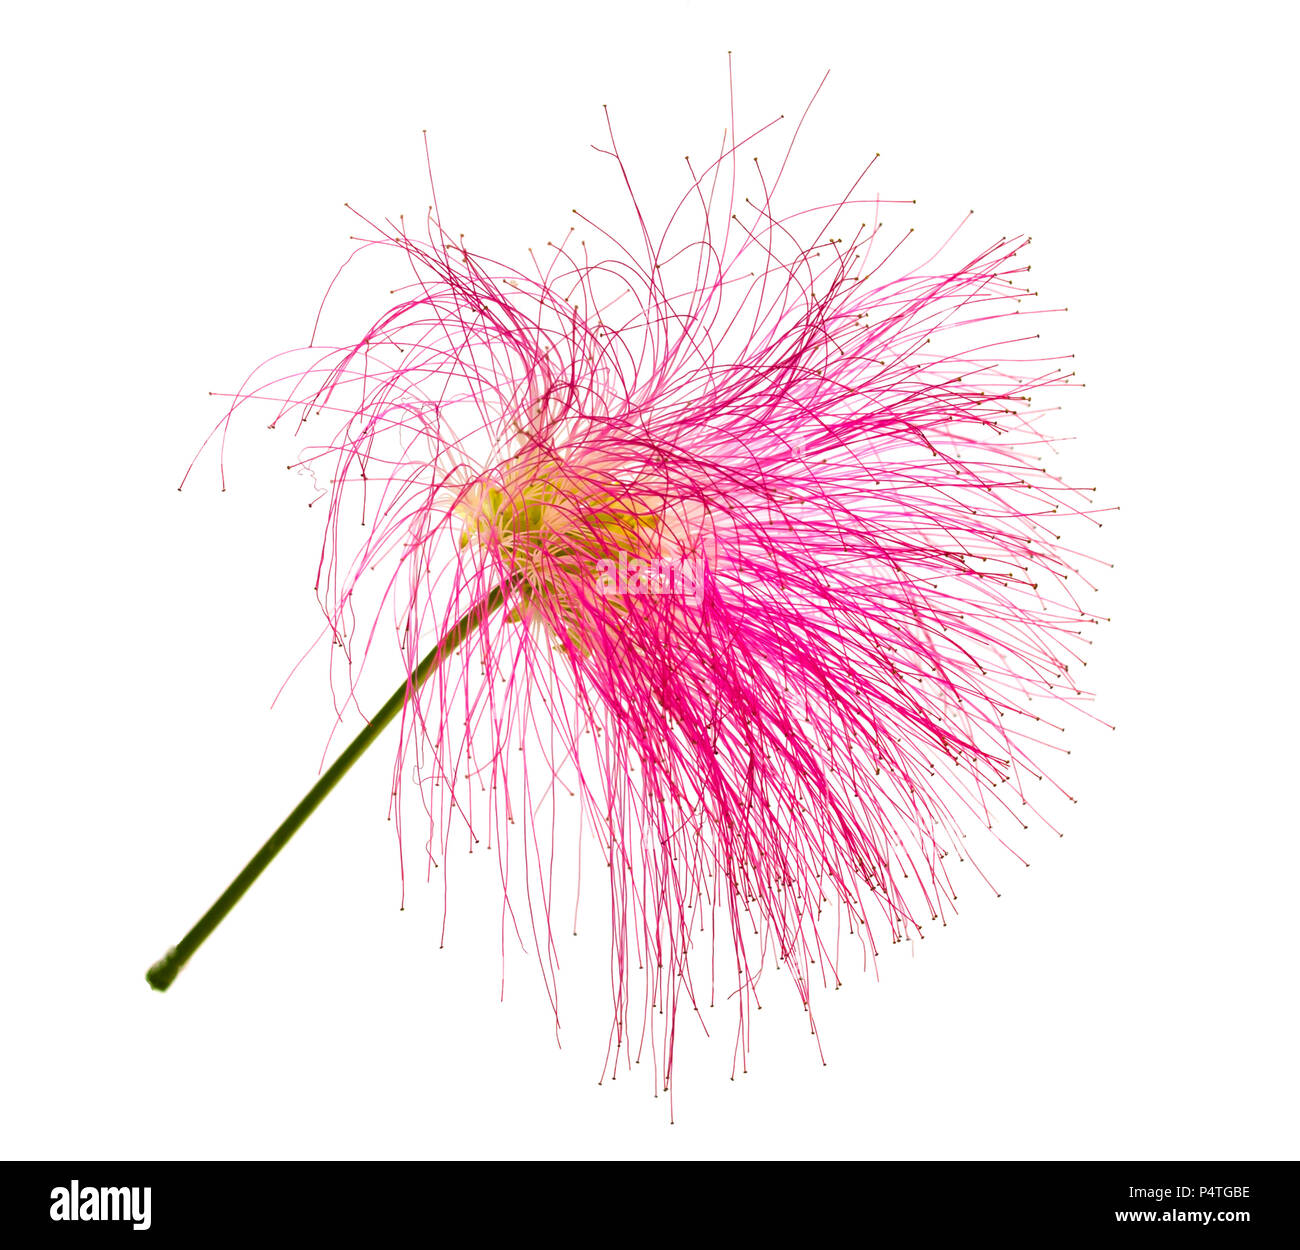 Calliandra eriophylla, pink fairy duster, mimosaide family on white background, Exotic tropical plant Stock Photo